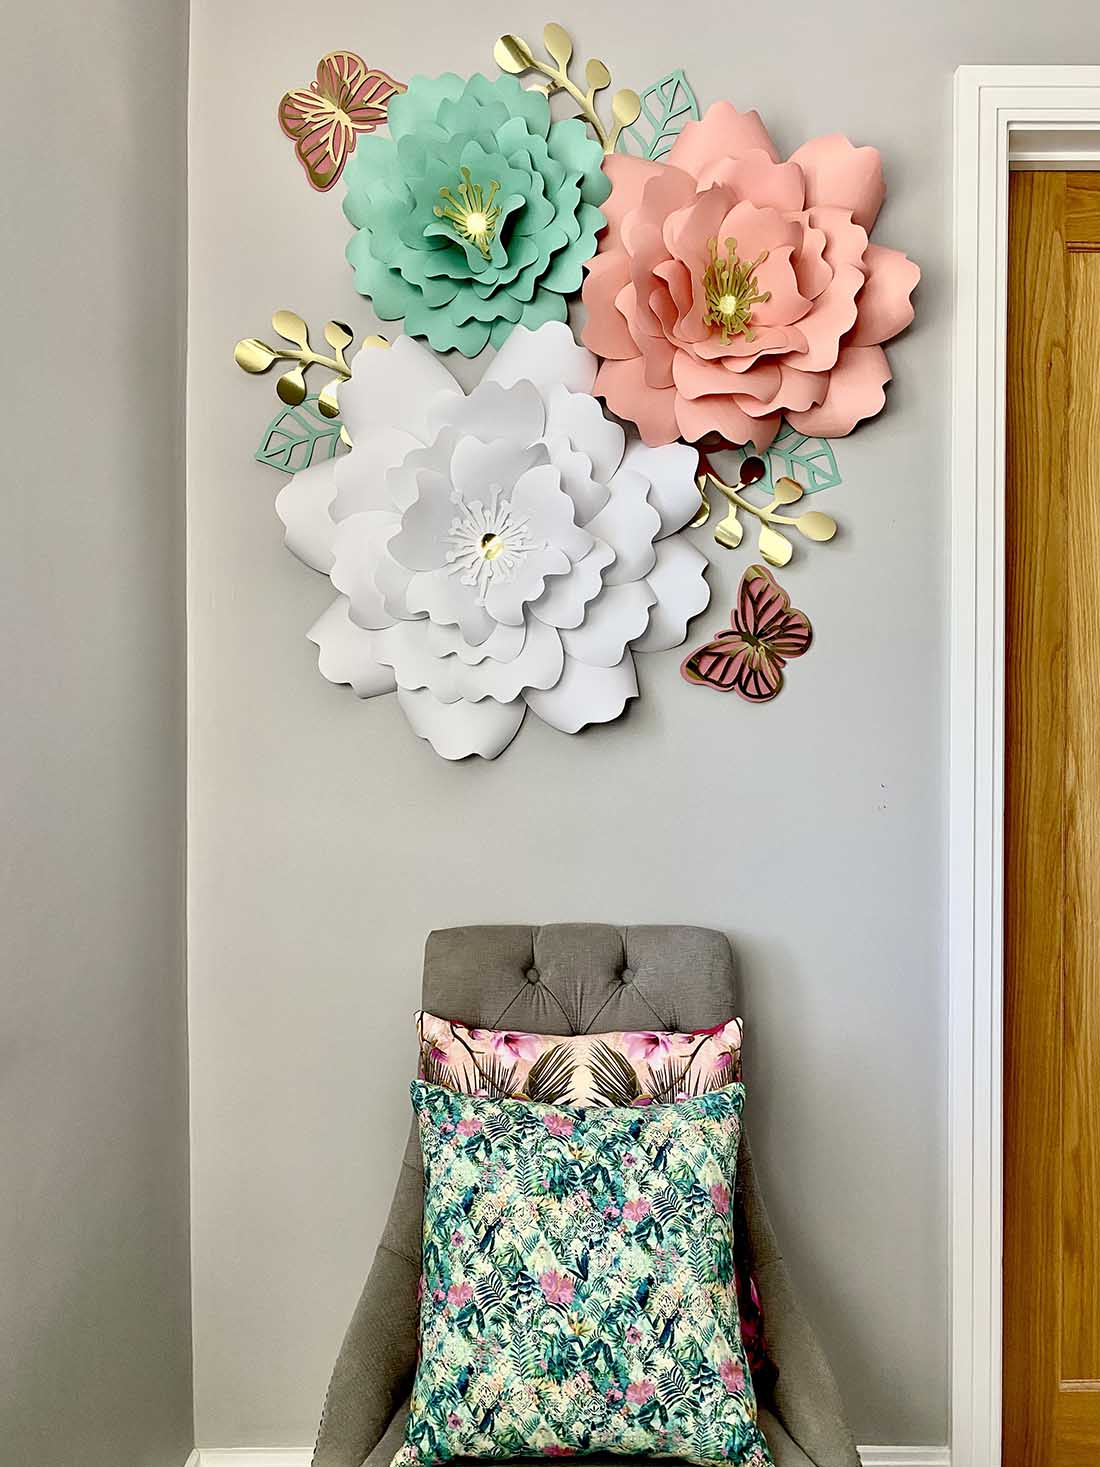 Huge paper flowers wall display, pink teal and gold giant paper flowers on wall